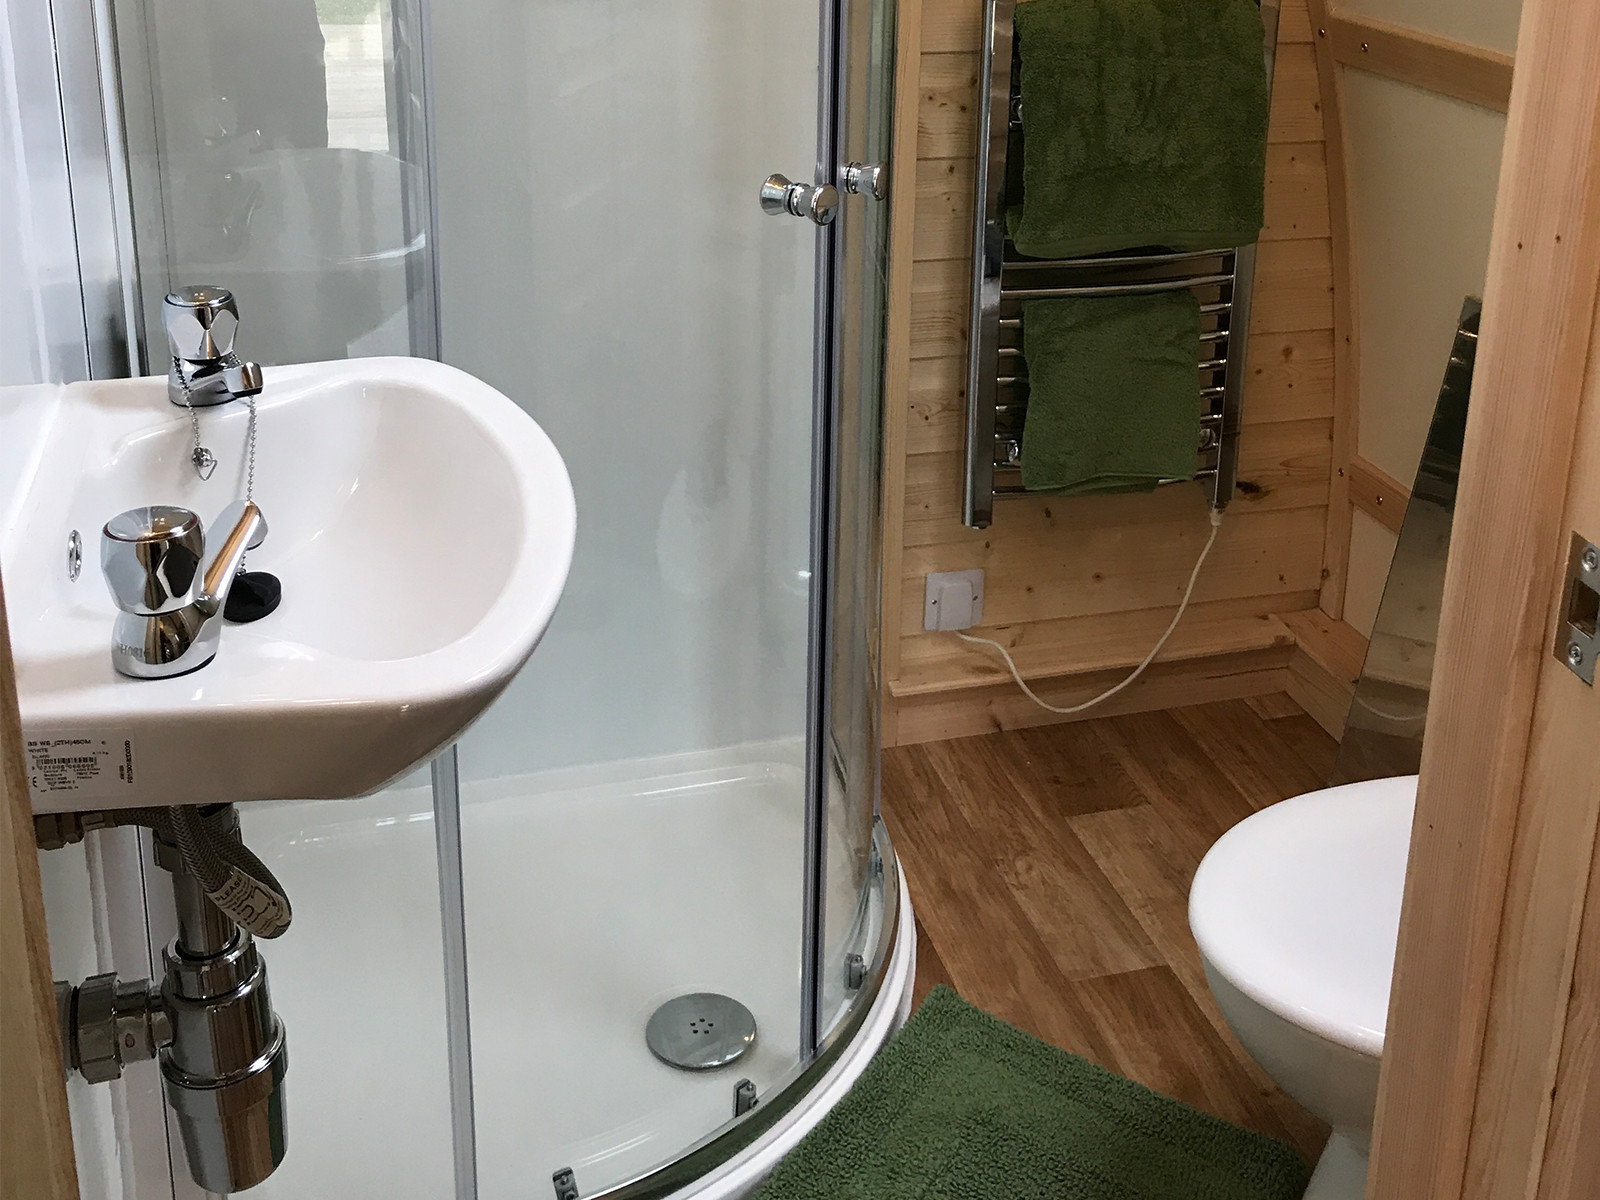 Luxury glamping pods with en-suite facilities at Evenlode Grounds Farm